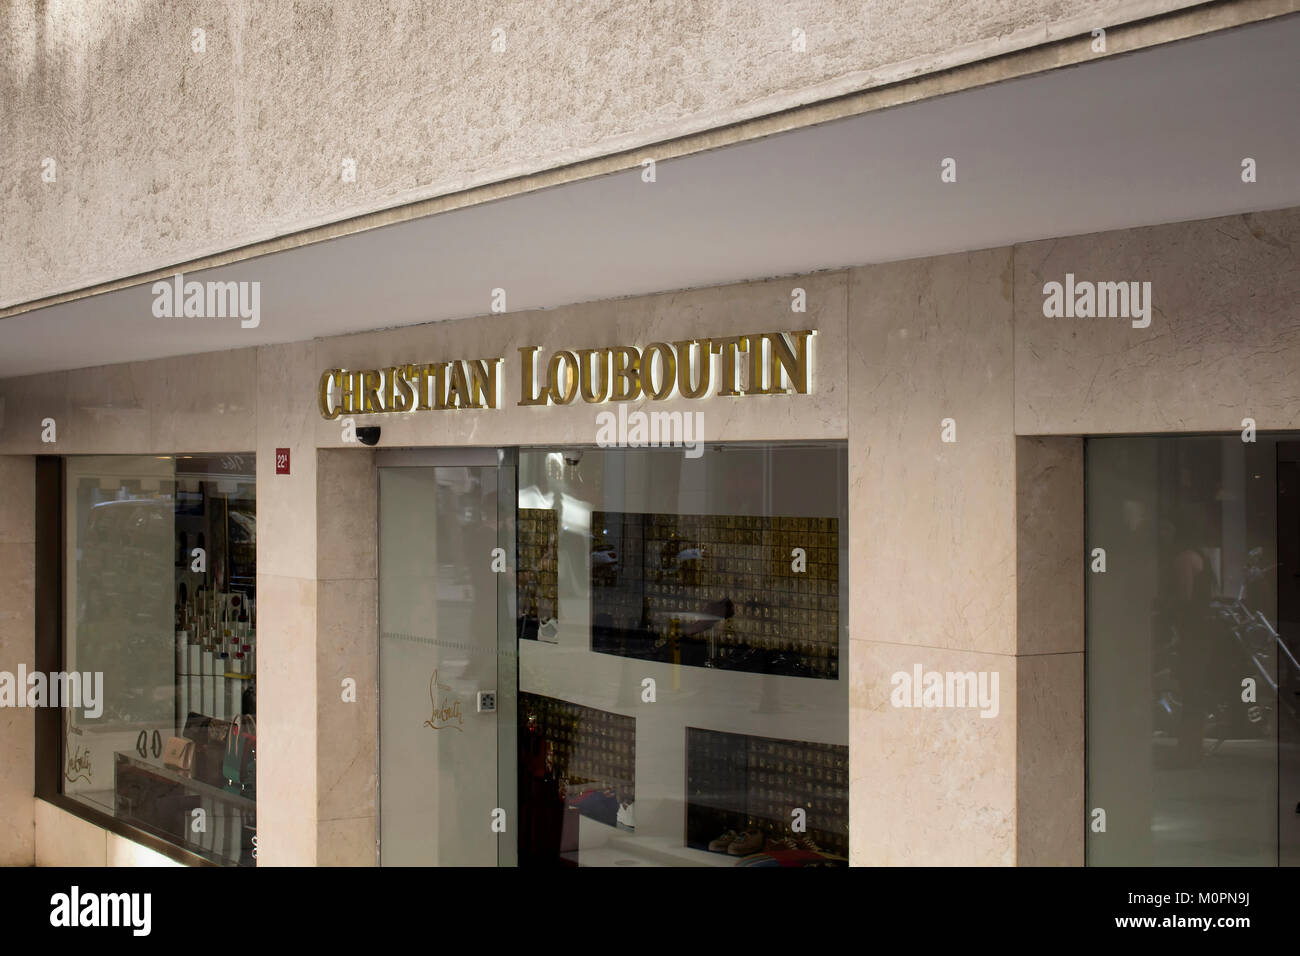 Vurdering Barn grænse View of a French fashion designer brand's store in Nisantasi / Istanbul  that is a popular shopping and residential district Stock Photo - Alamy